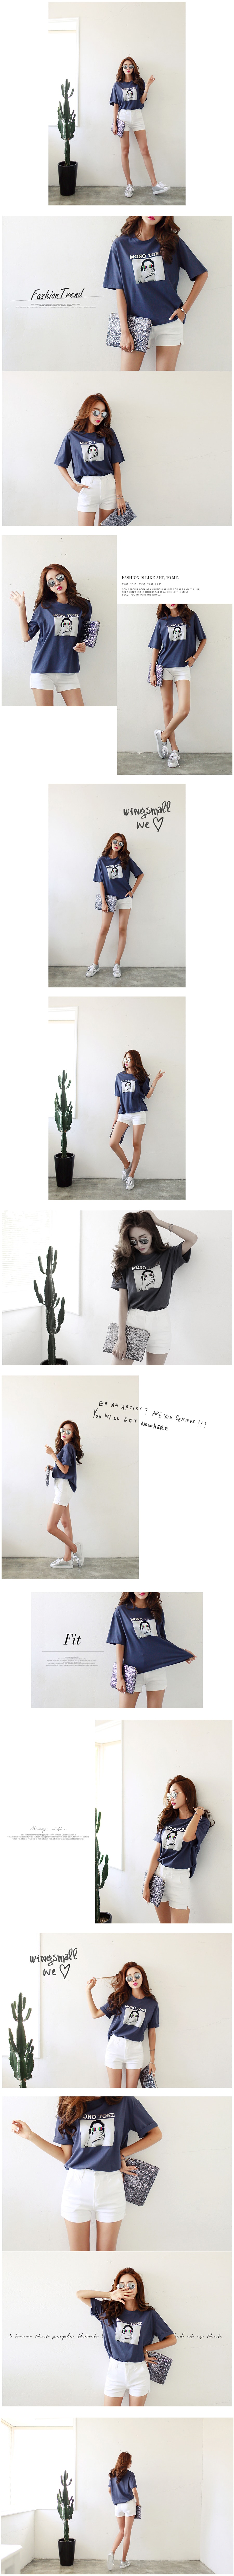 [Special Offer] Silver Letters Print T-Shirt 2 Pieces Set #White+Navy One Size(S-M)